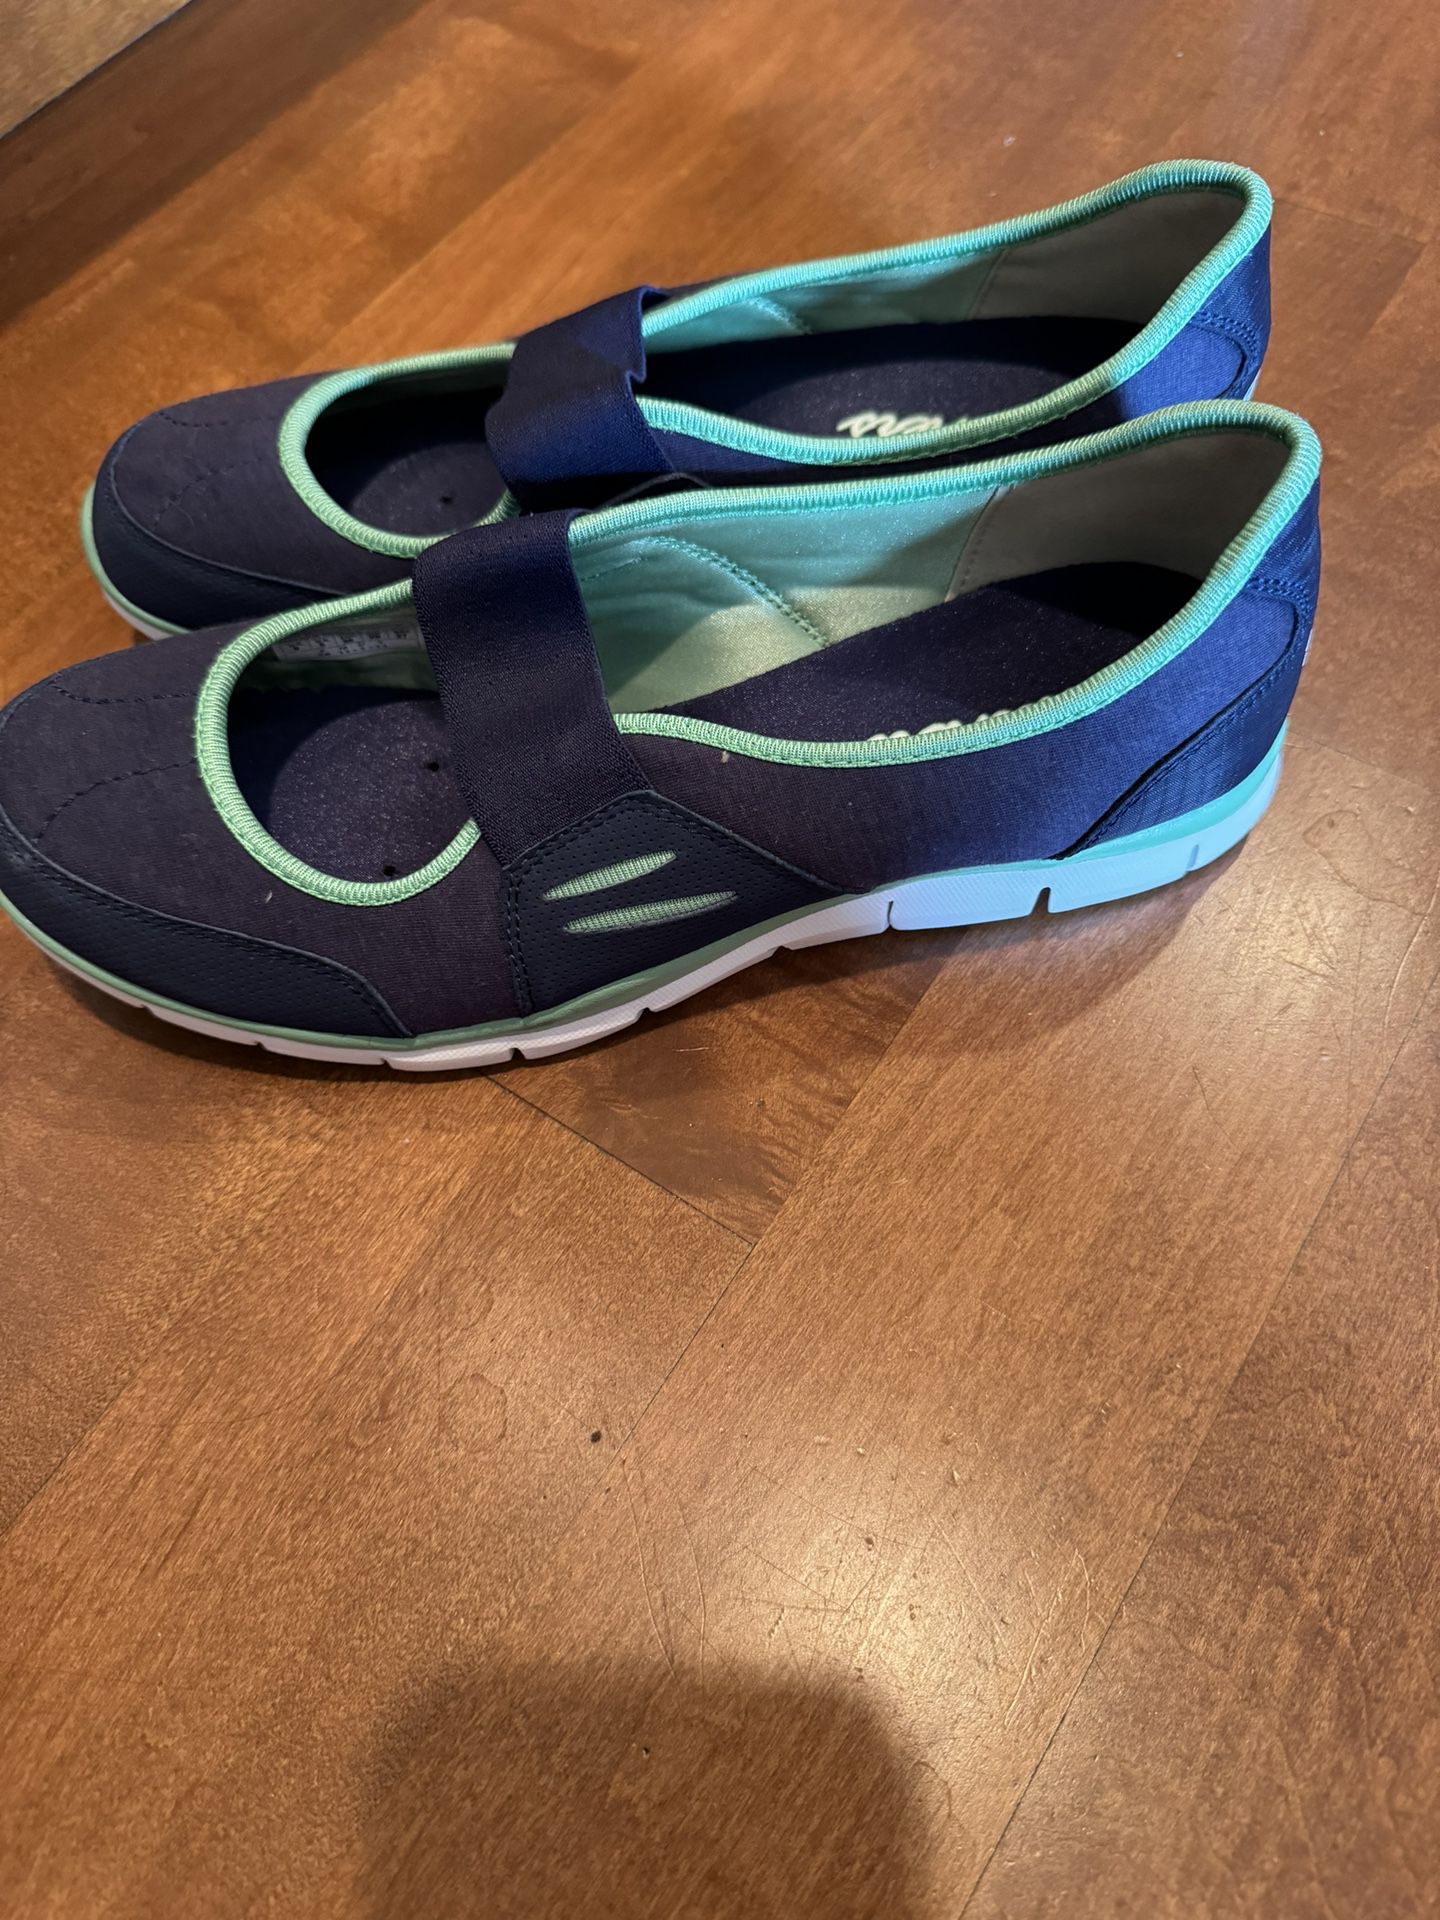 Woman’s New Skechers Comfort Shoes Shipping Avaialbe 